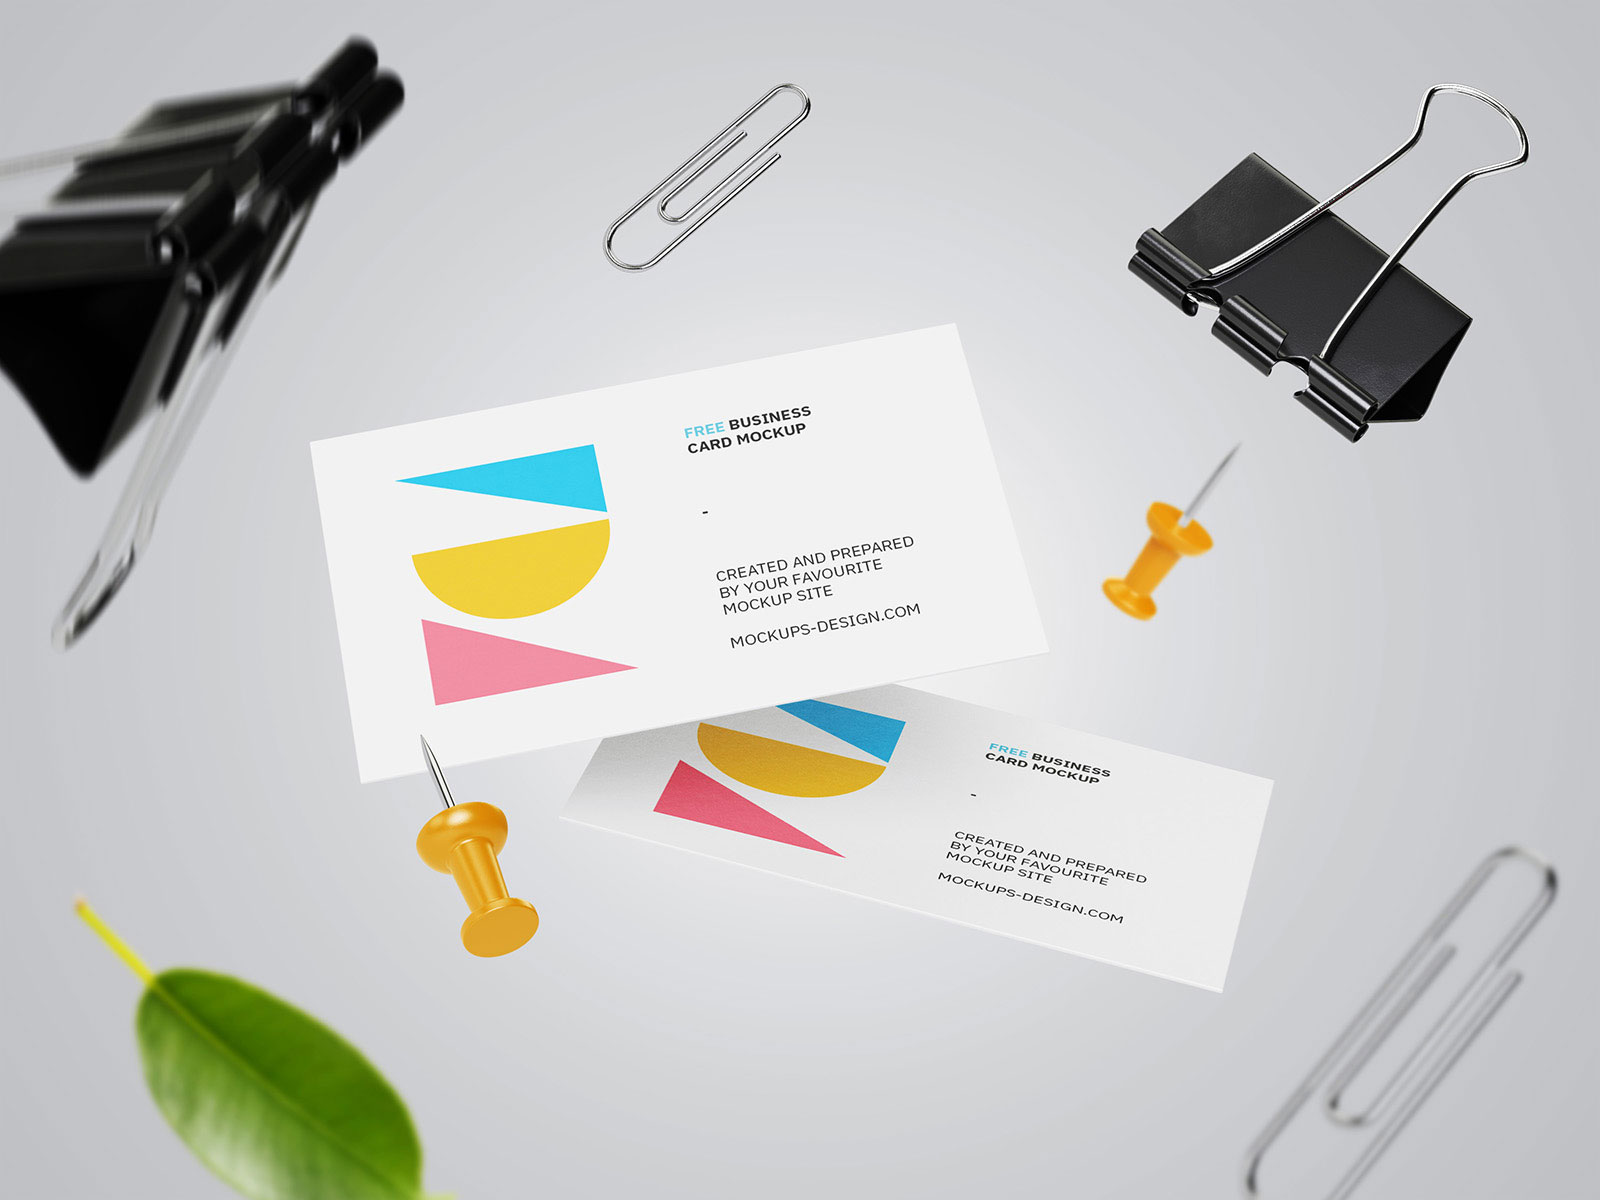 Falling Business Cards Mockup: Gravity Elegance for Your Brand!